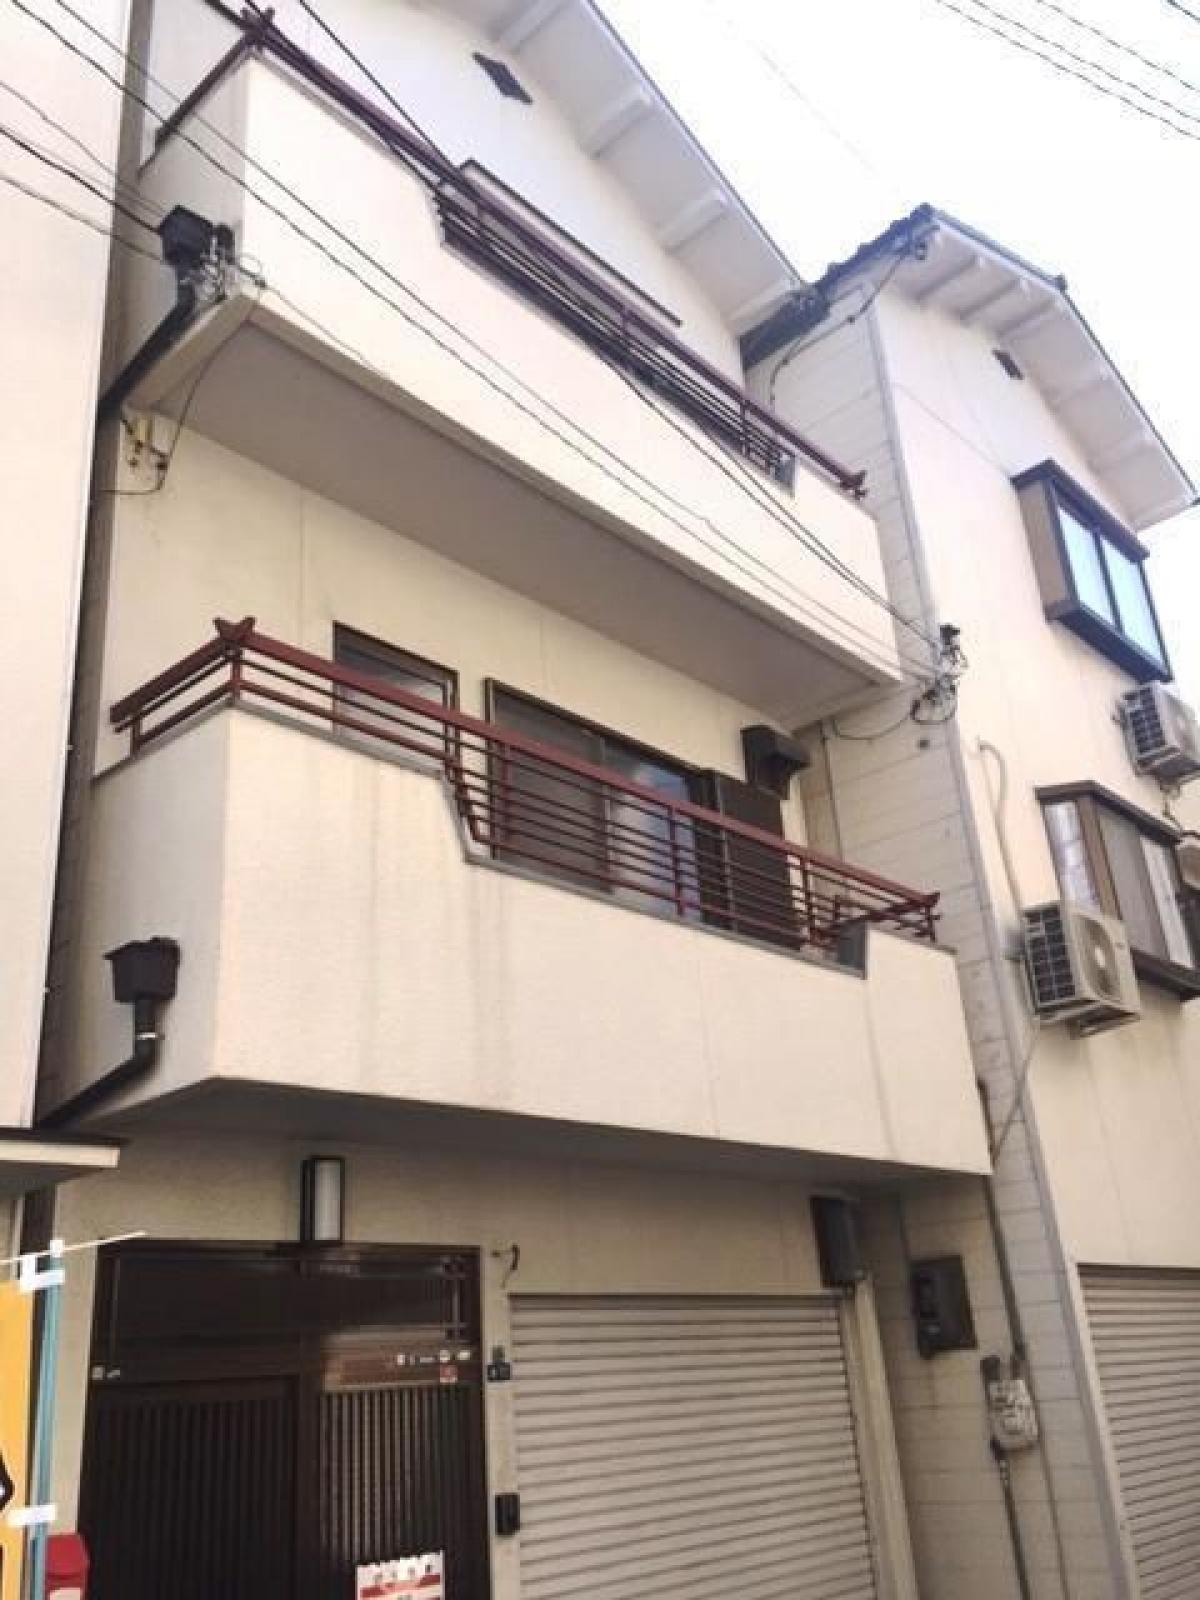 Picture of Home For Sale in Daito Shi, Osaka, Japan